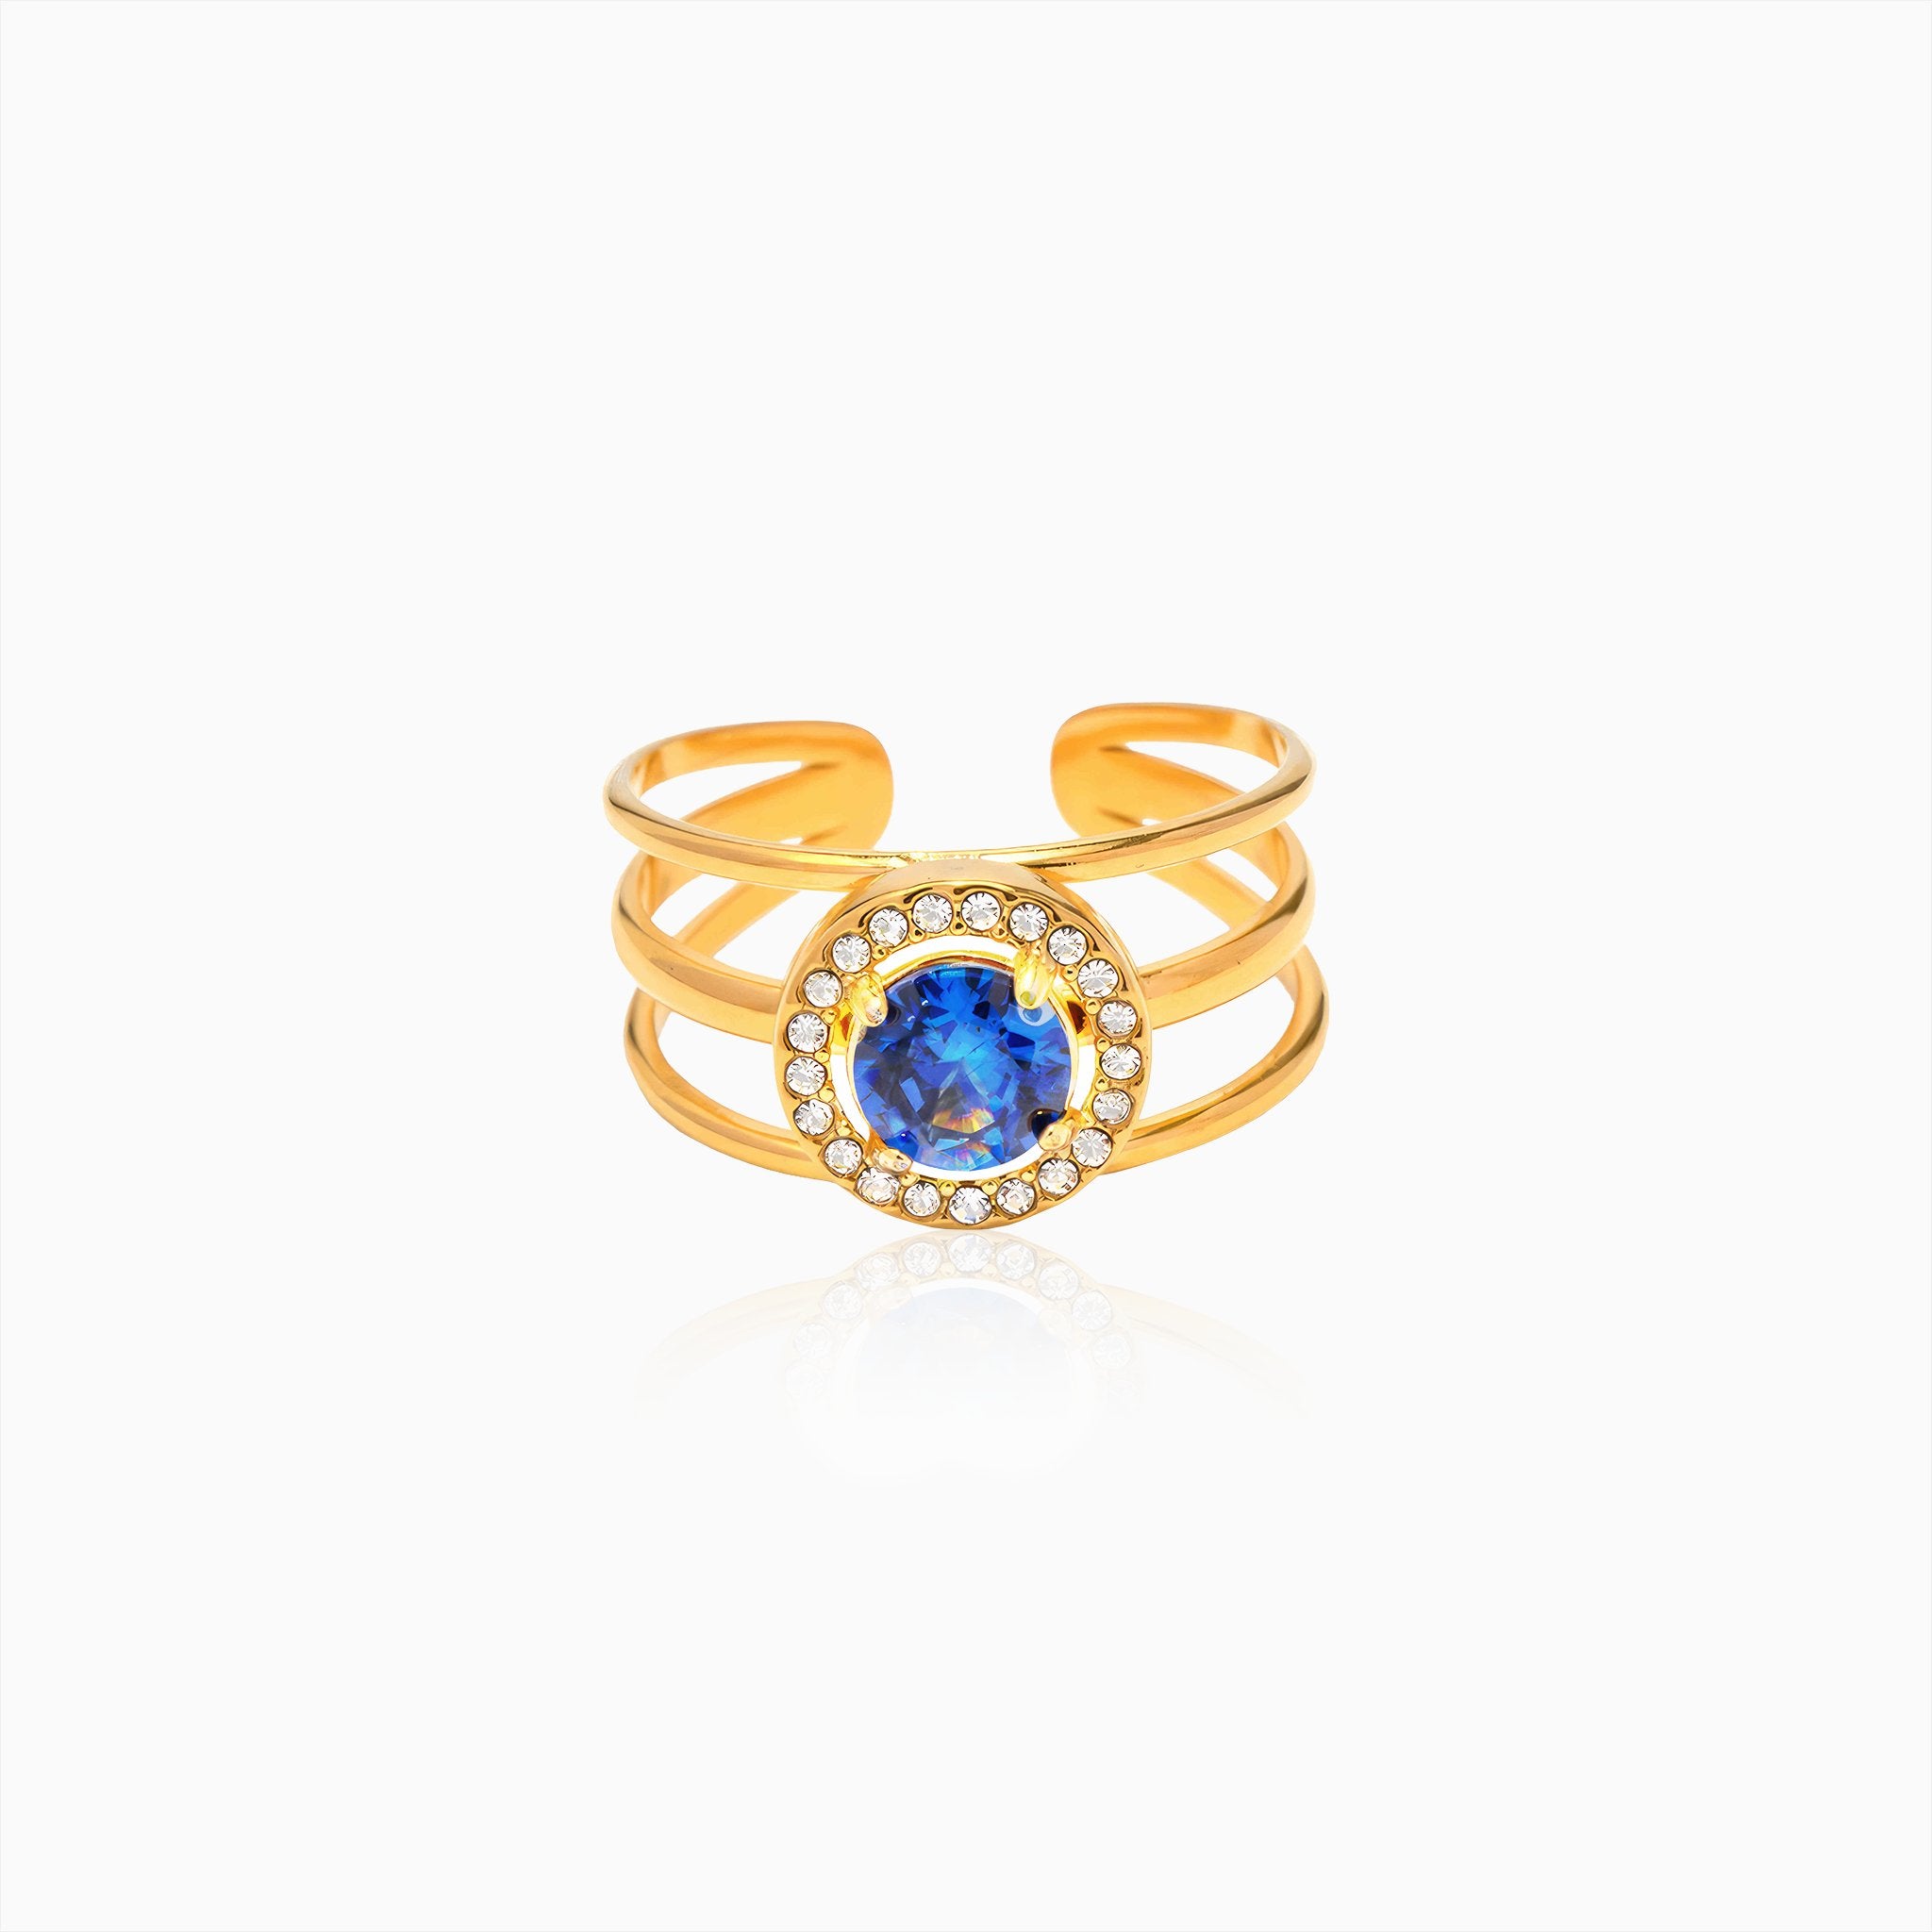 Elegant Open Design Gemstone Ring - Nobbier - Ring - 18K Gold And Titanium PVD Coated Jewelry